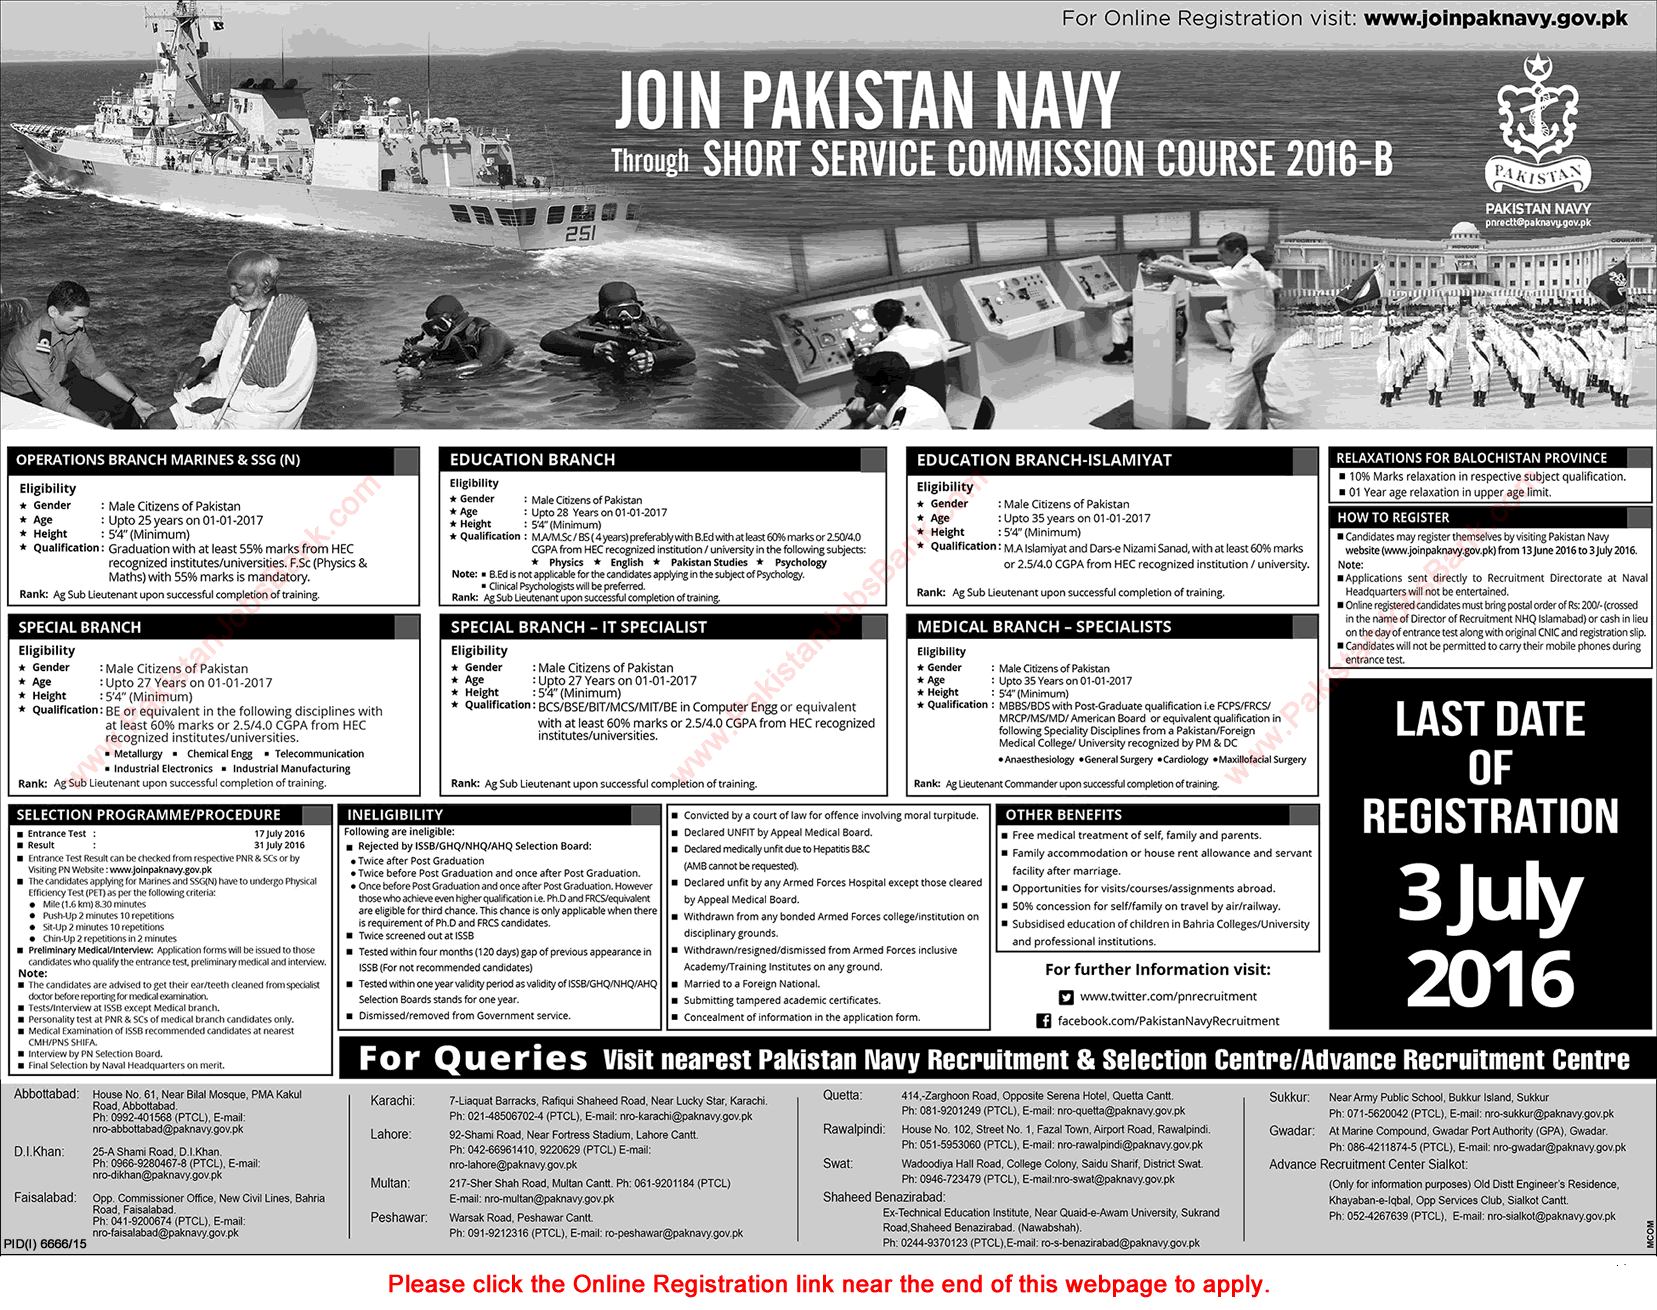 Join Pakistan Navy through Short Service Commission Course 2016-B Entry Online Registration Latest